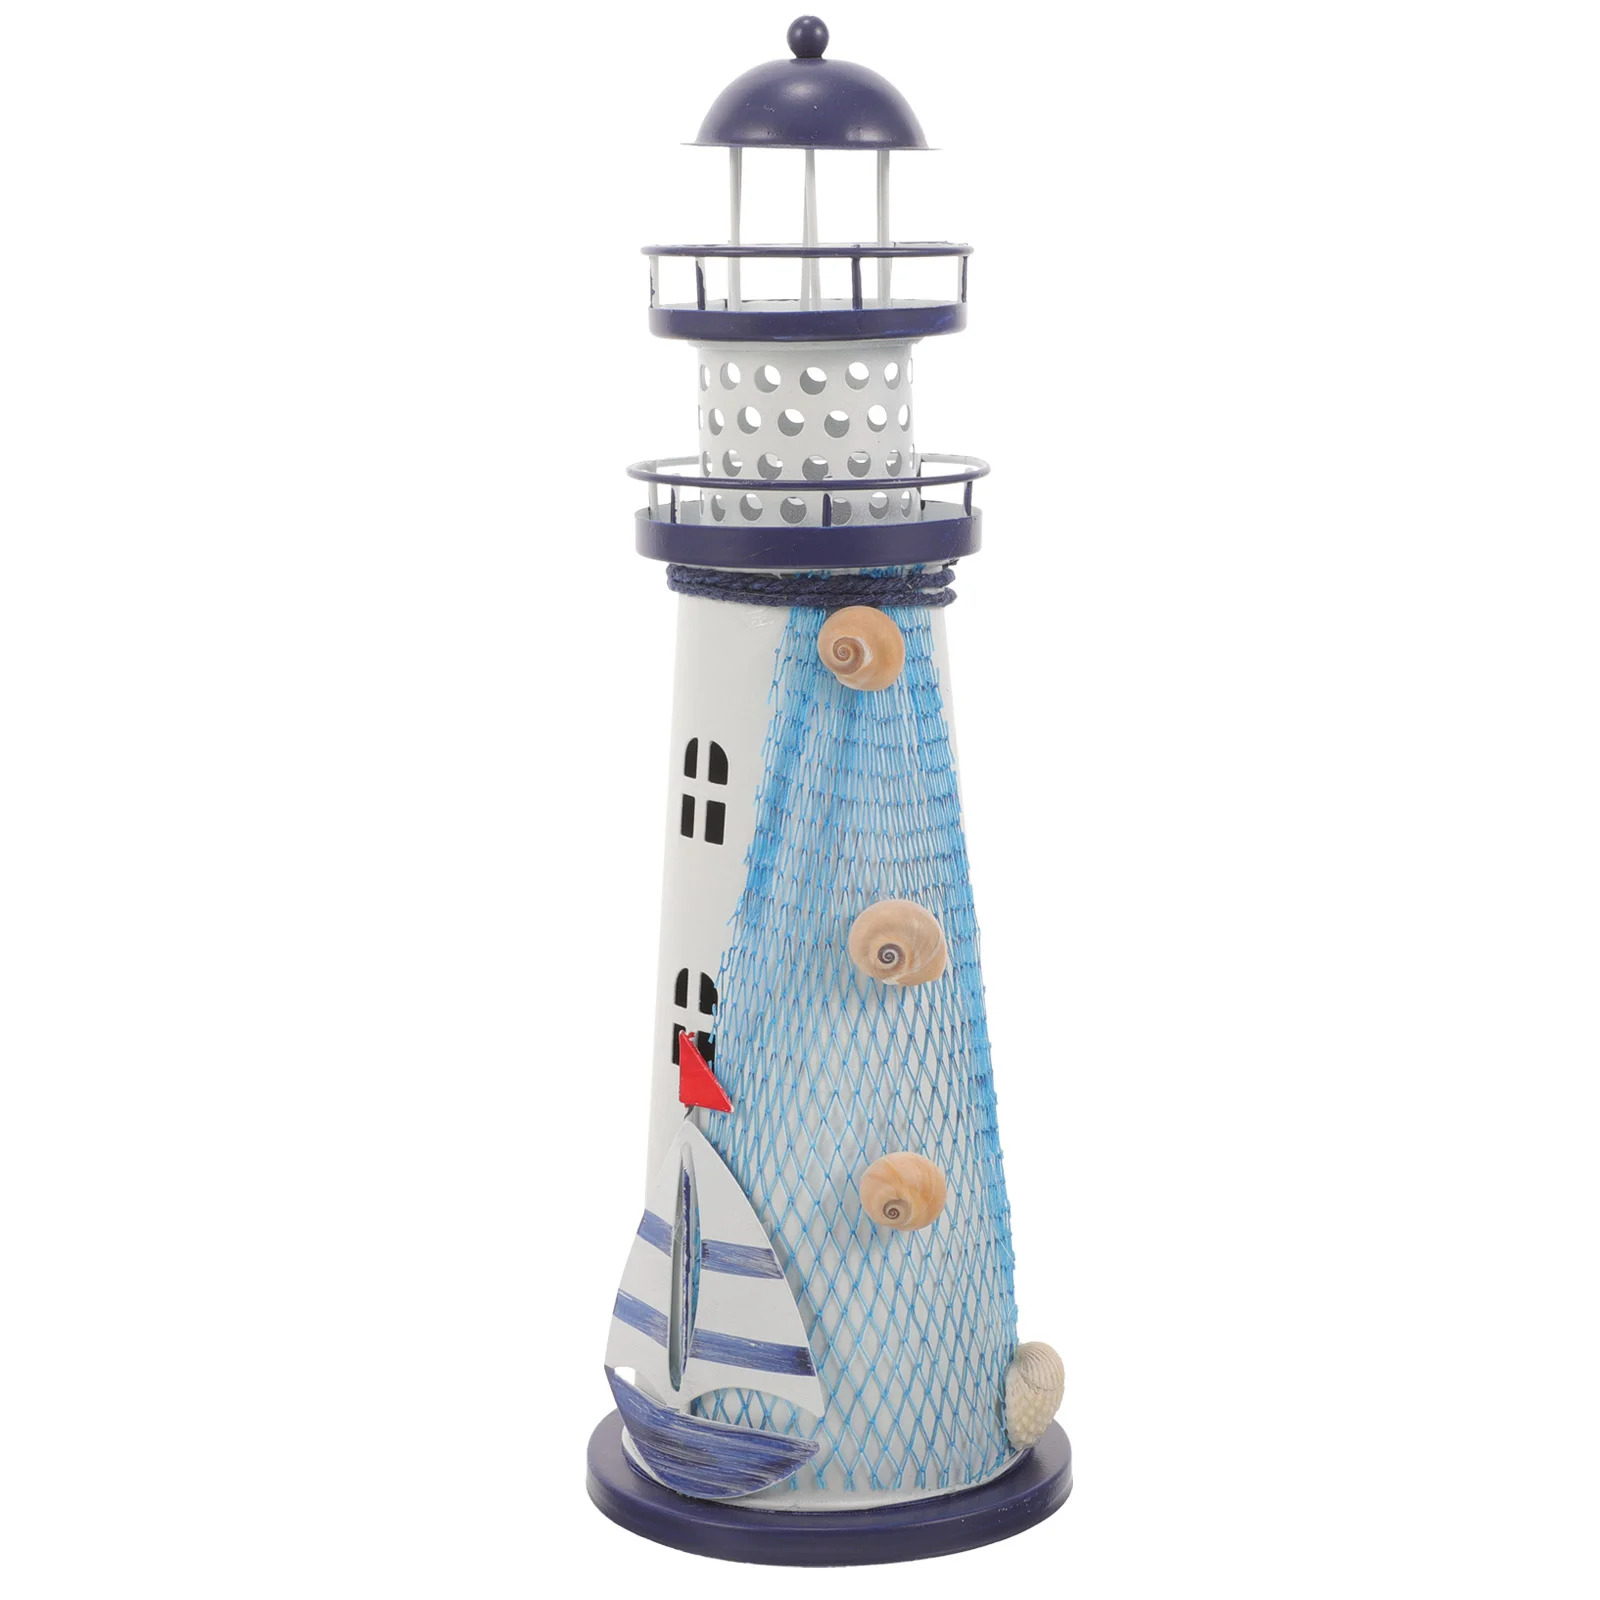 Nativity Ornament Nautical Desk Accessories Light House Decorations for Home Lighthouse Iron Boat Mediterranean Lamp